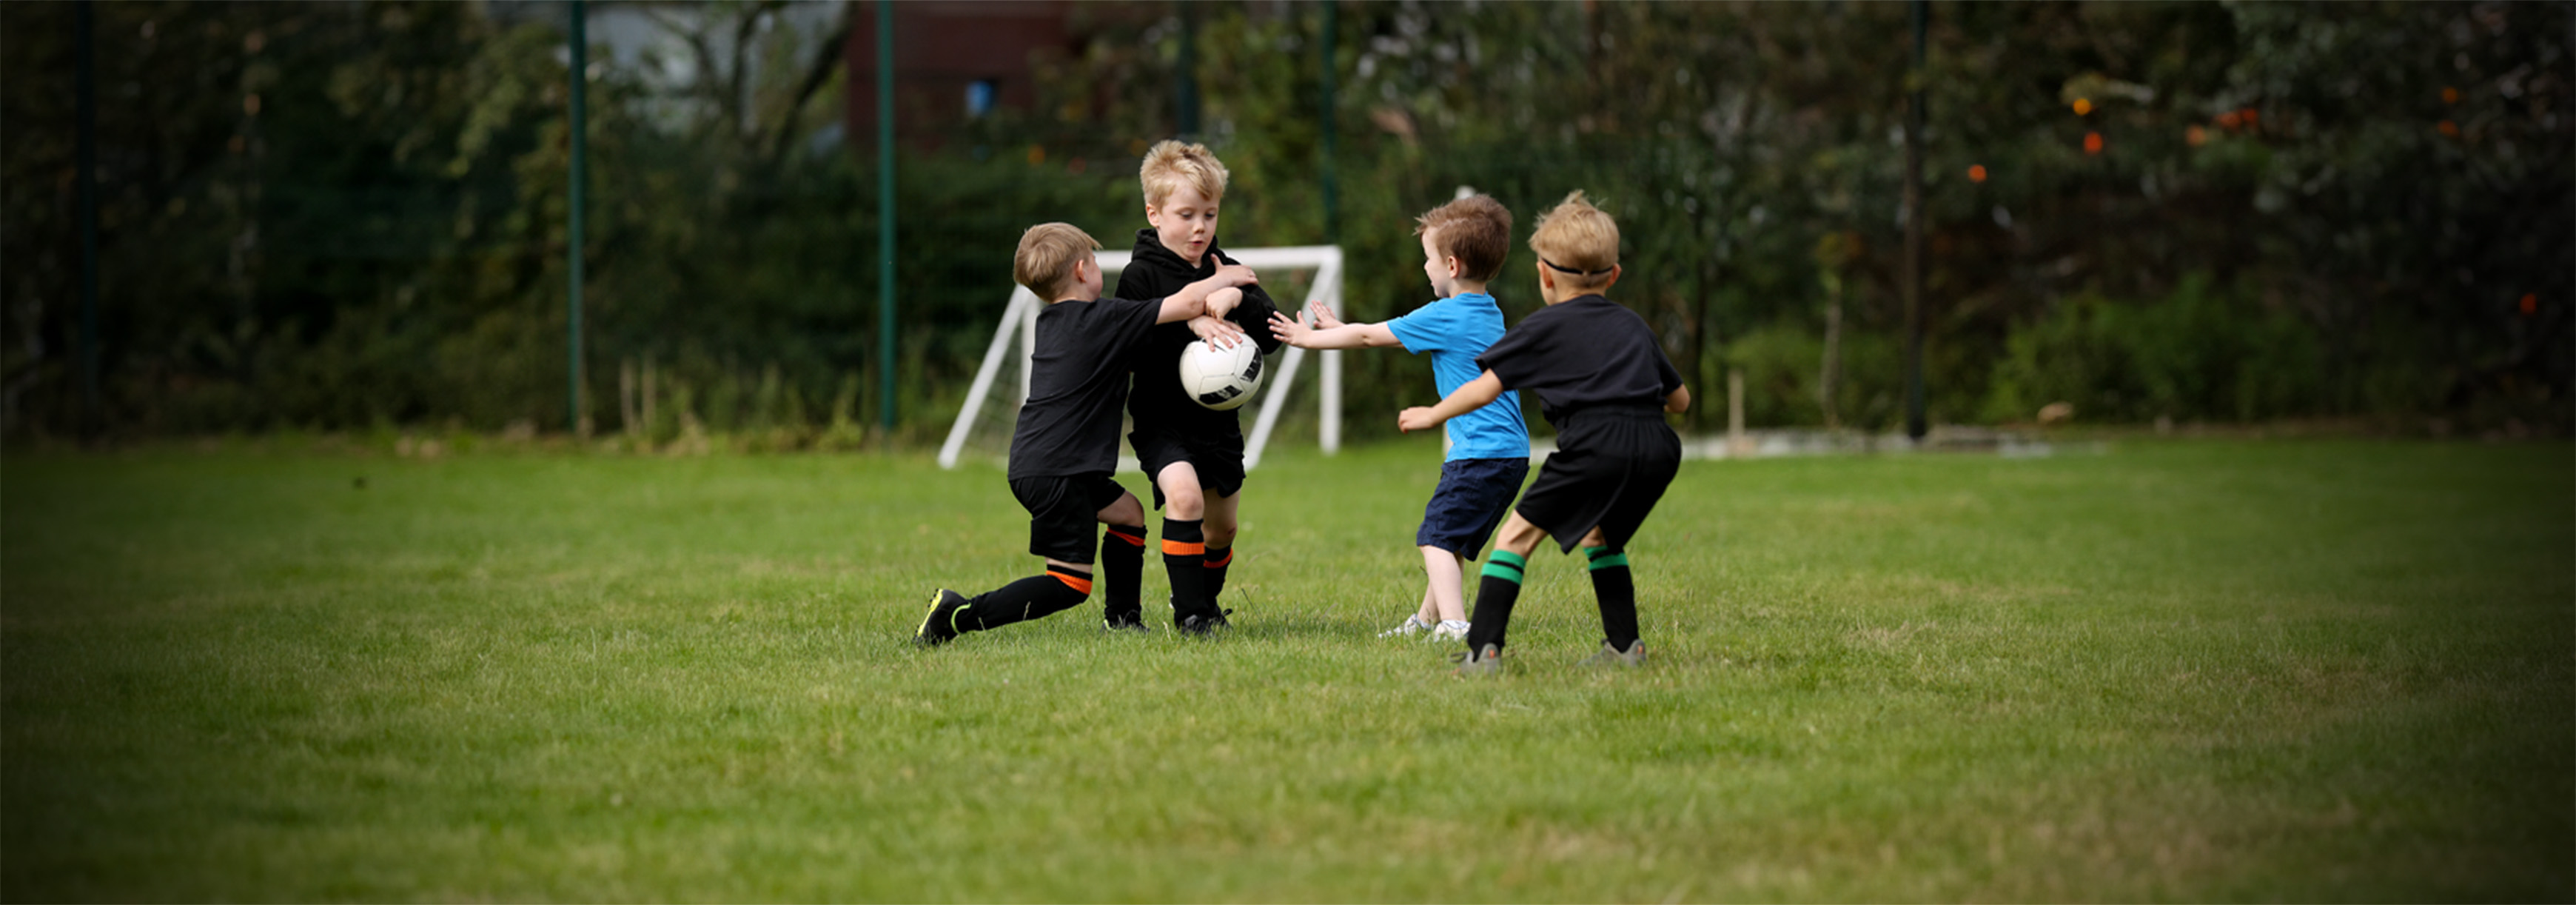 During a Play Phase session, a young boy runs with a ball in his hands while three others try to take it off him.